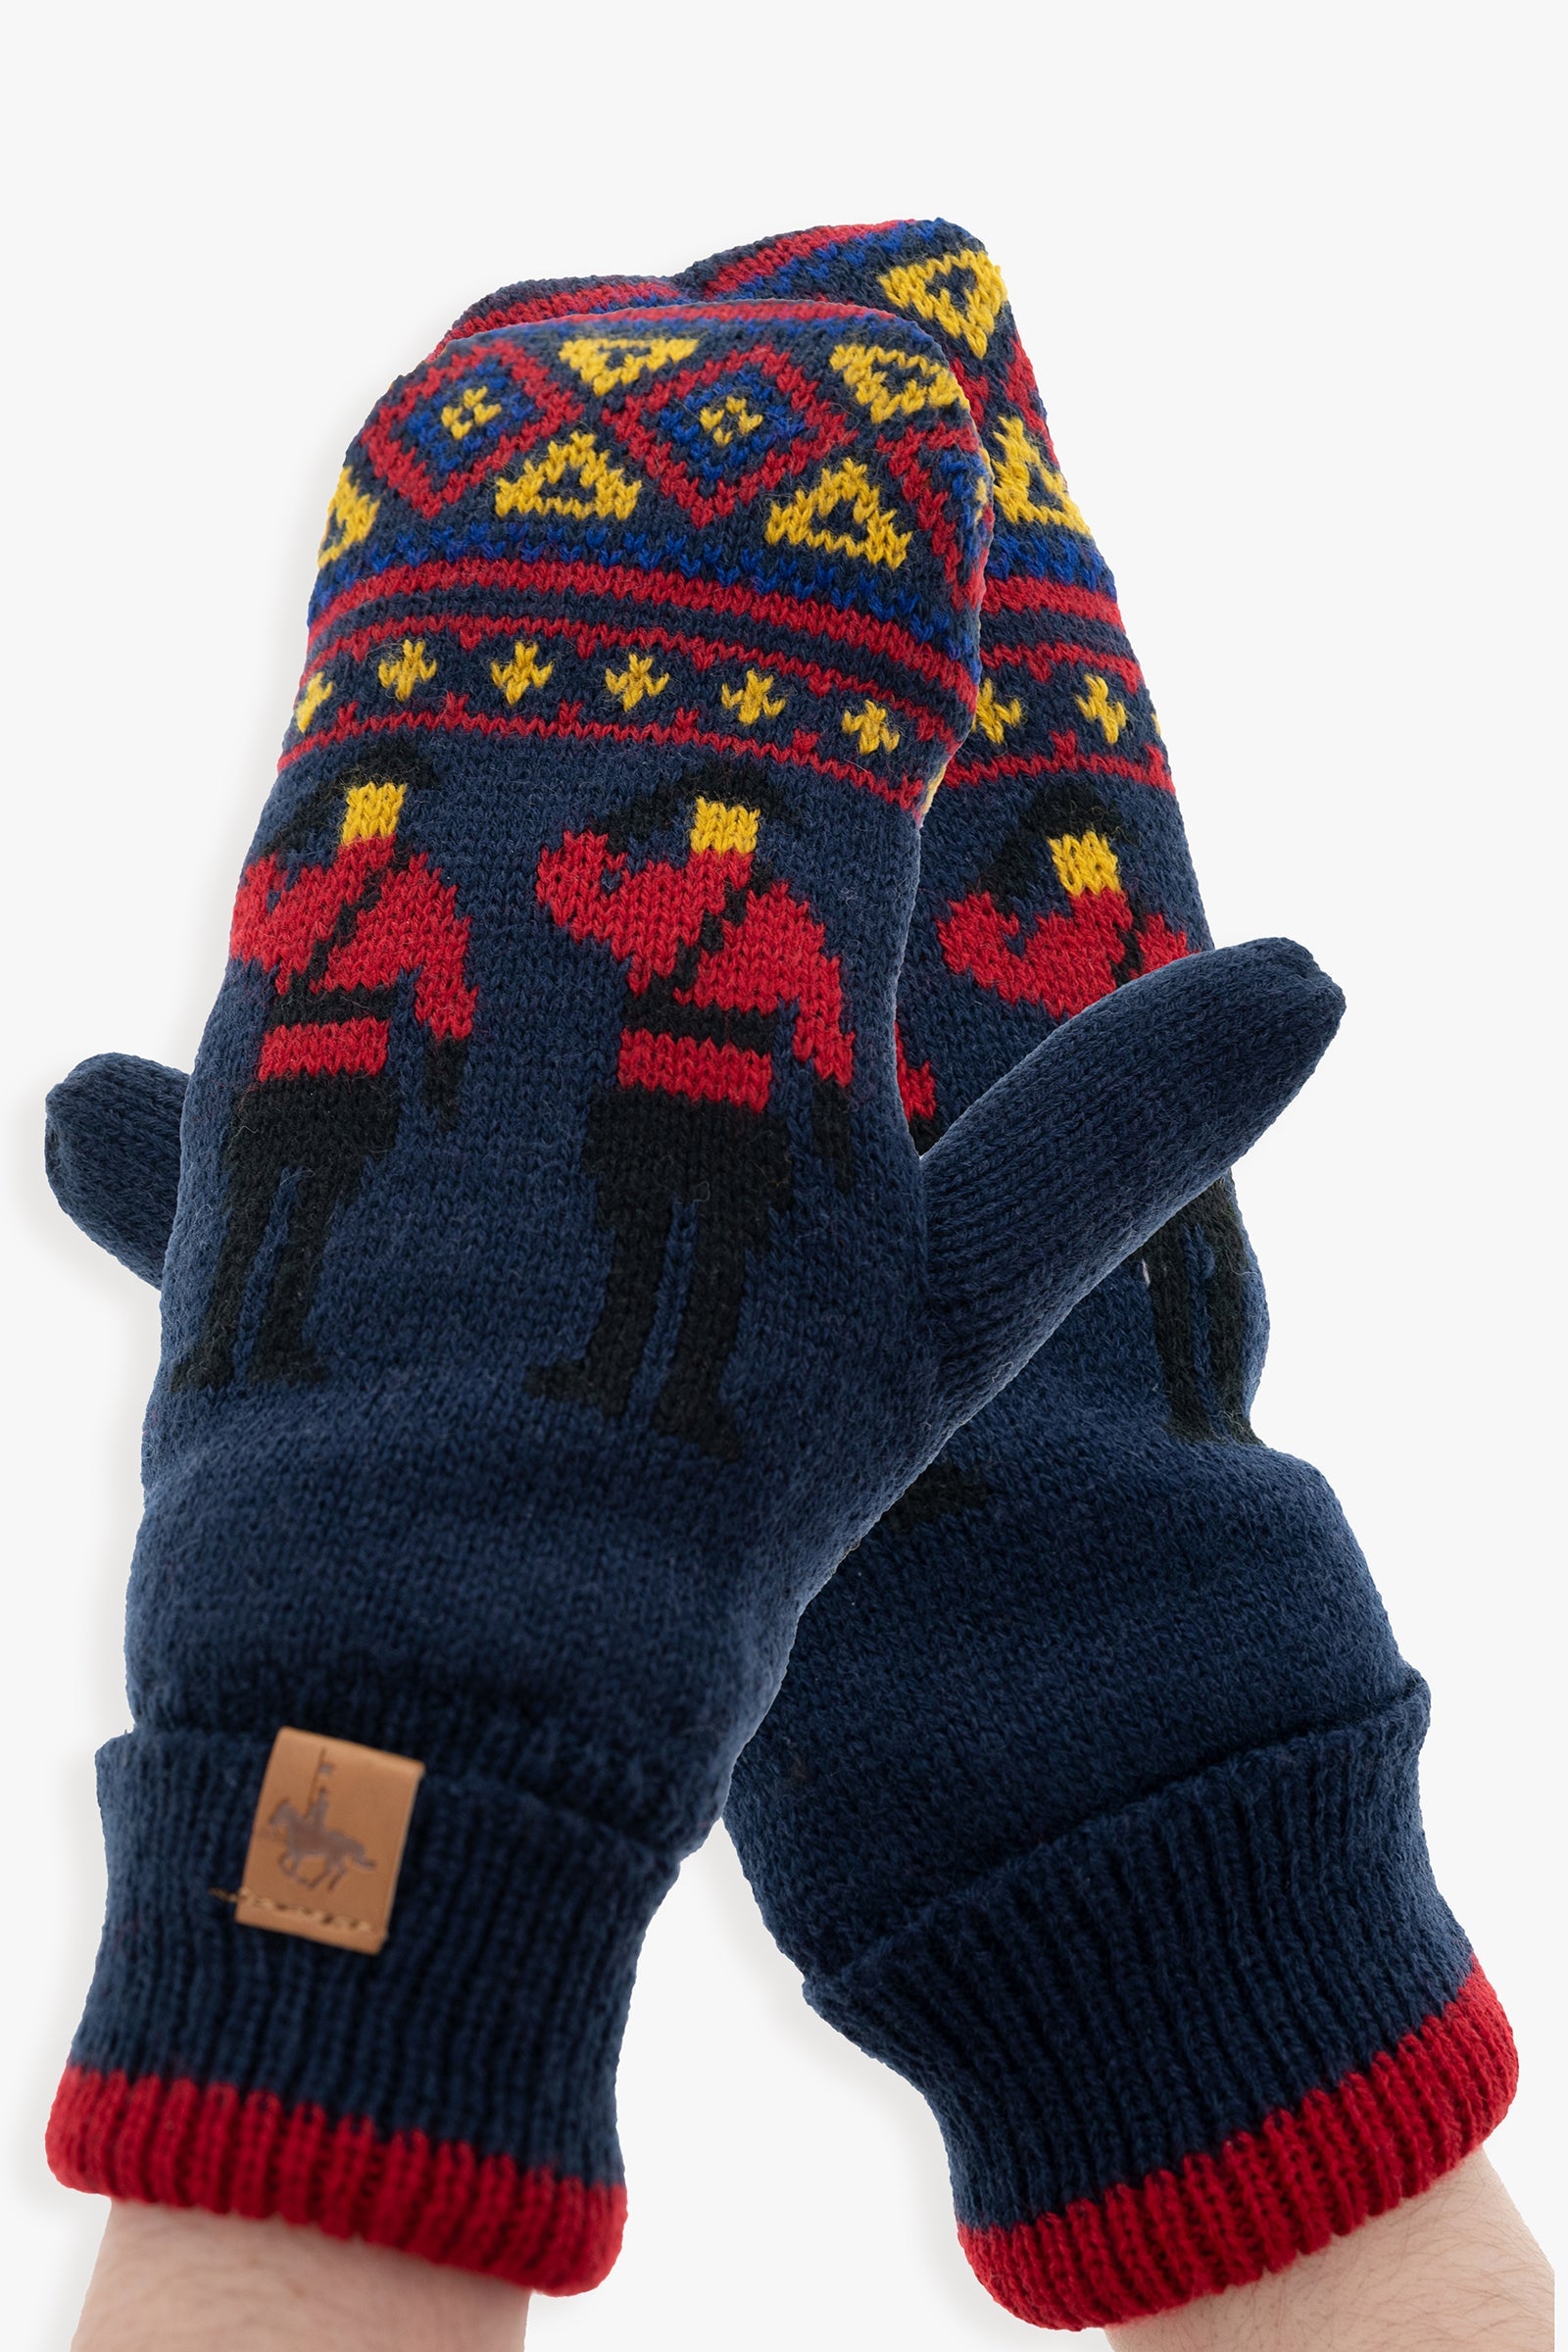 RCMP Royal Canadian Mounted Police Ladies Thermal Winter Mittens